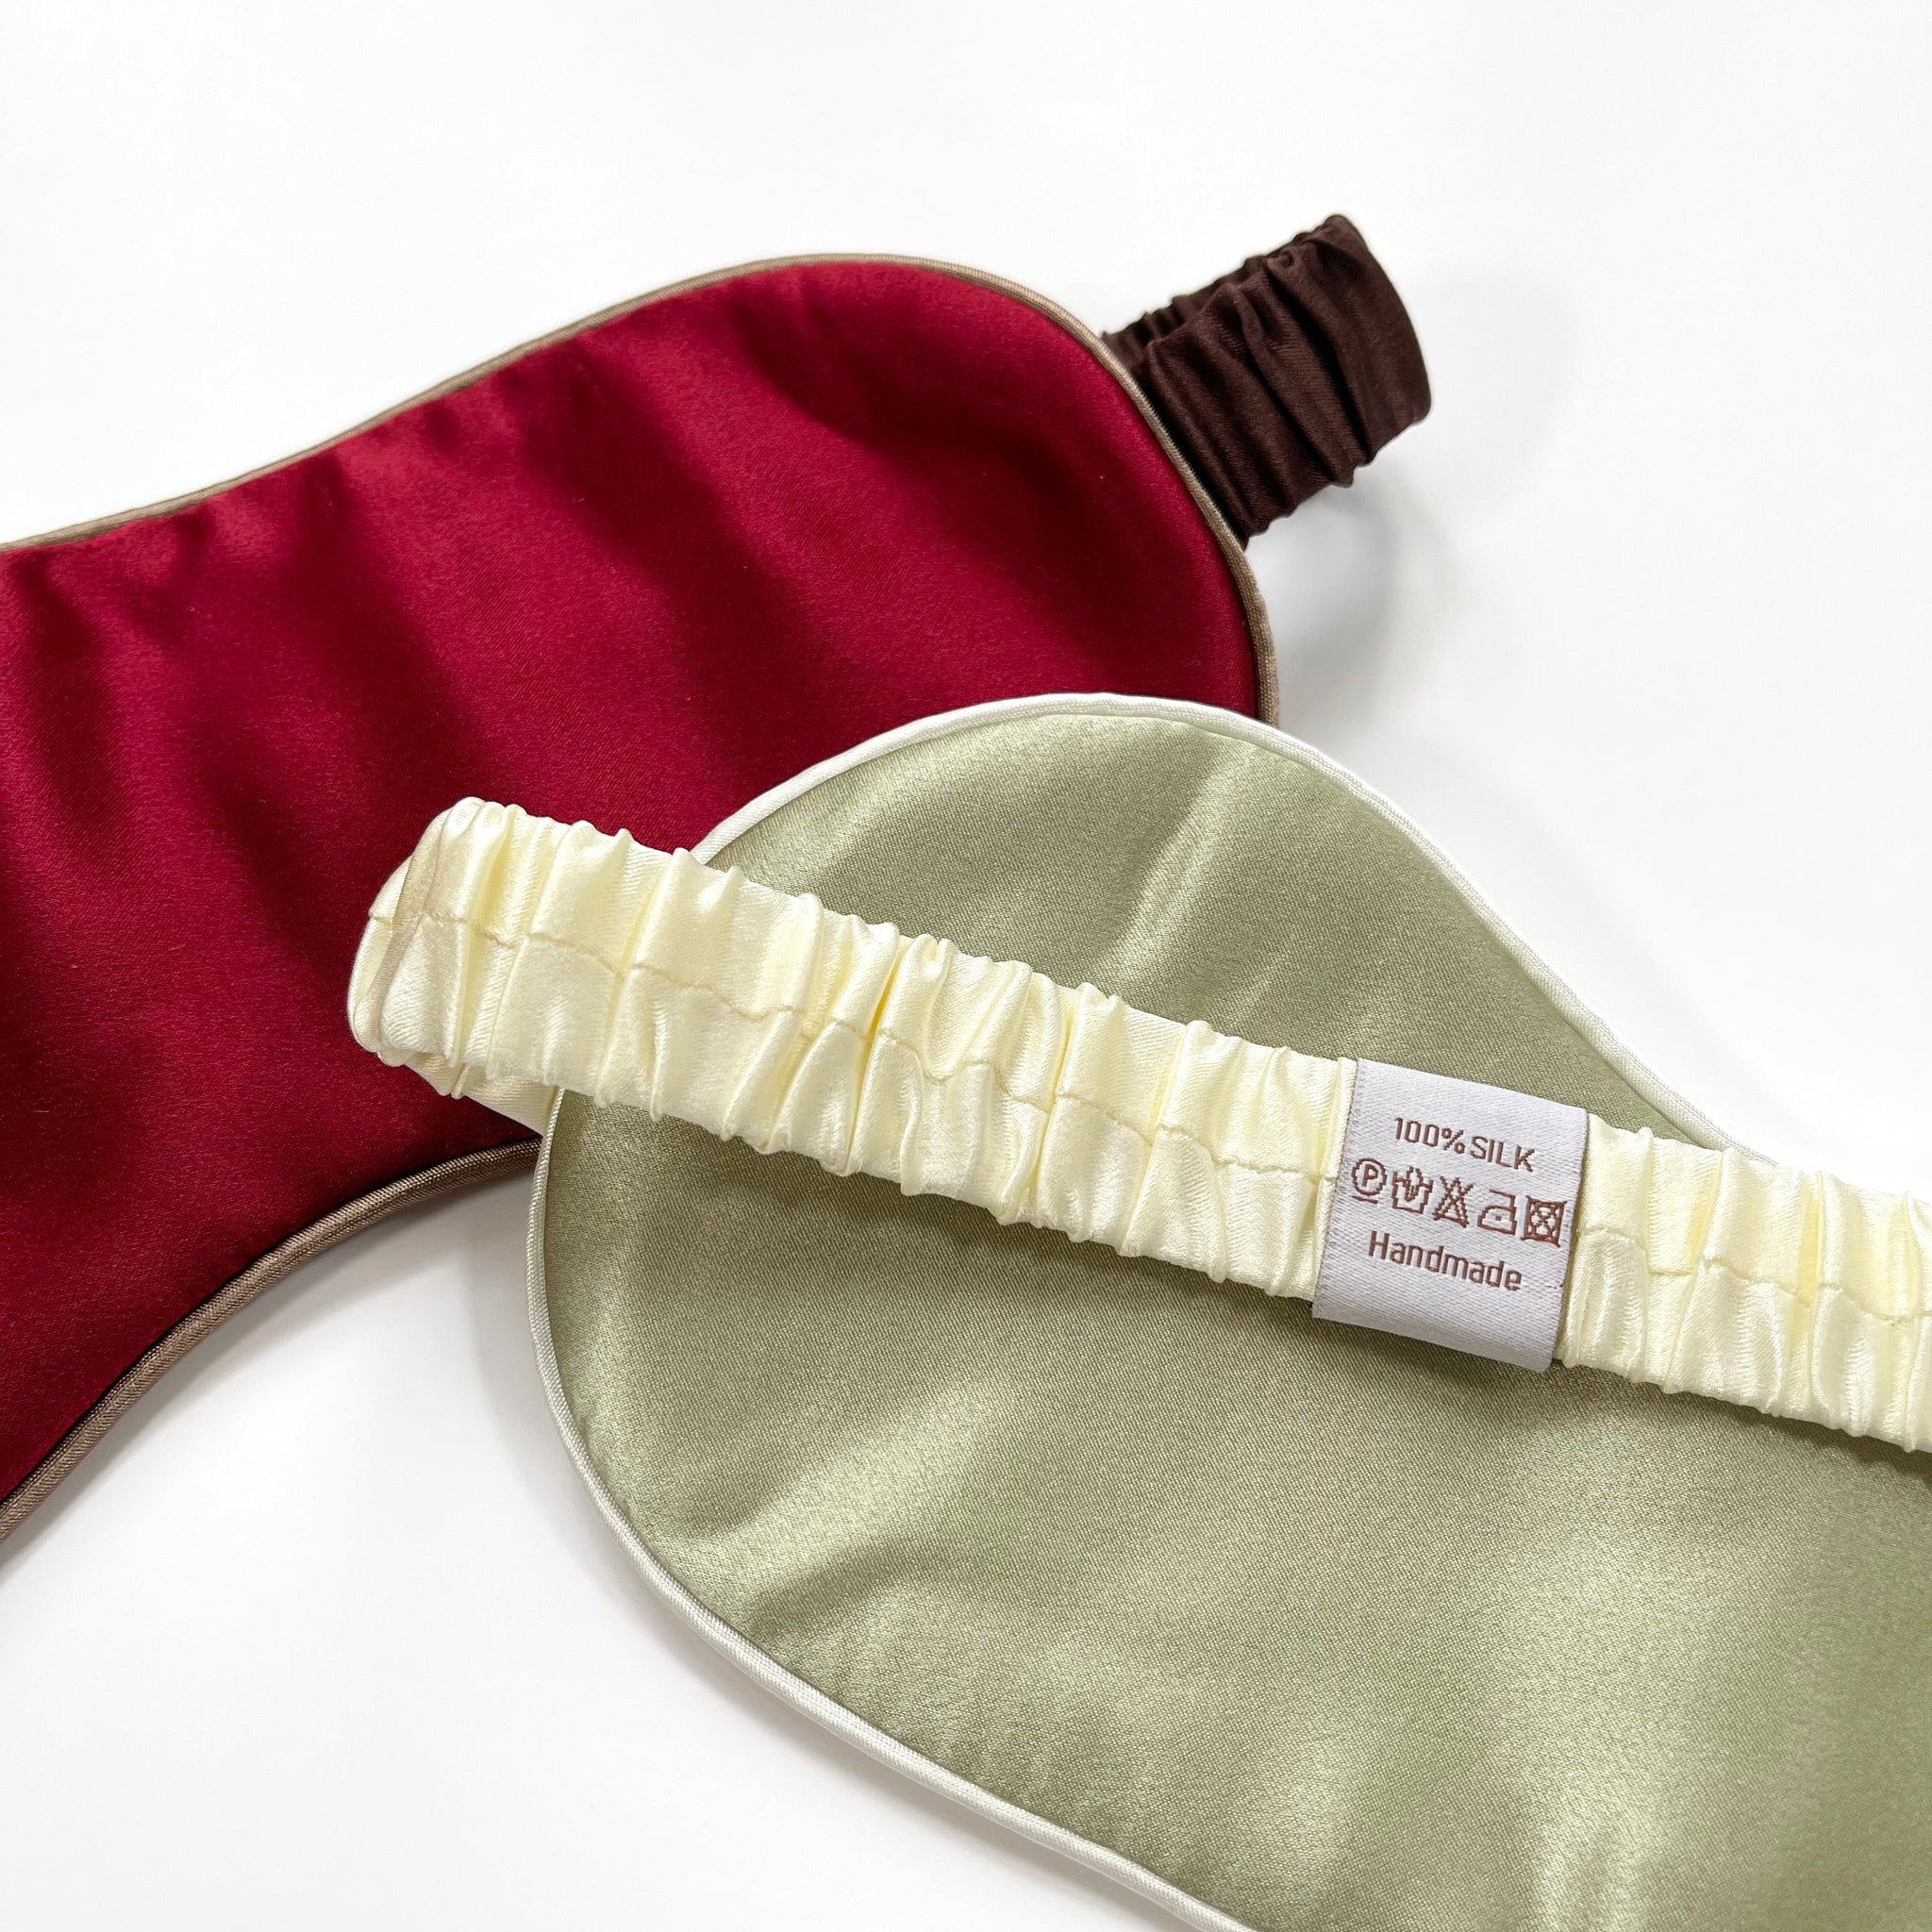 a red silk eye mask with brown strap and a pea green silk eye mask with creamy white strap